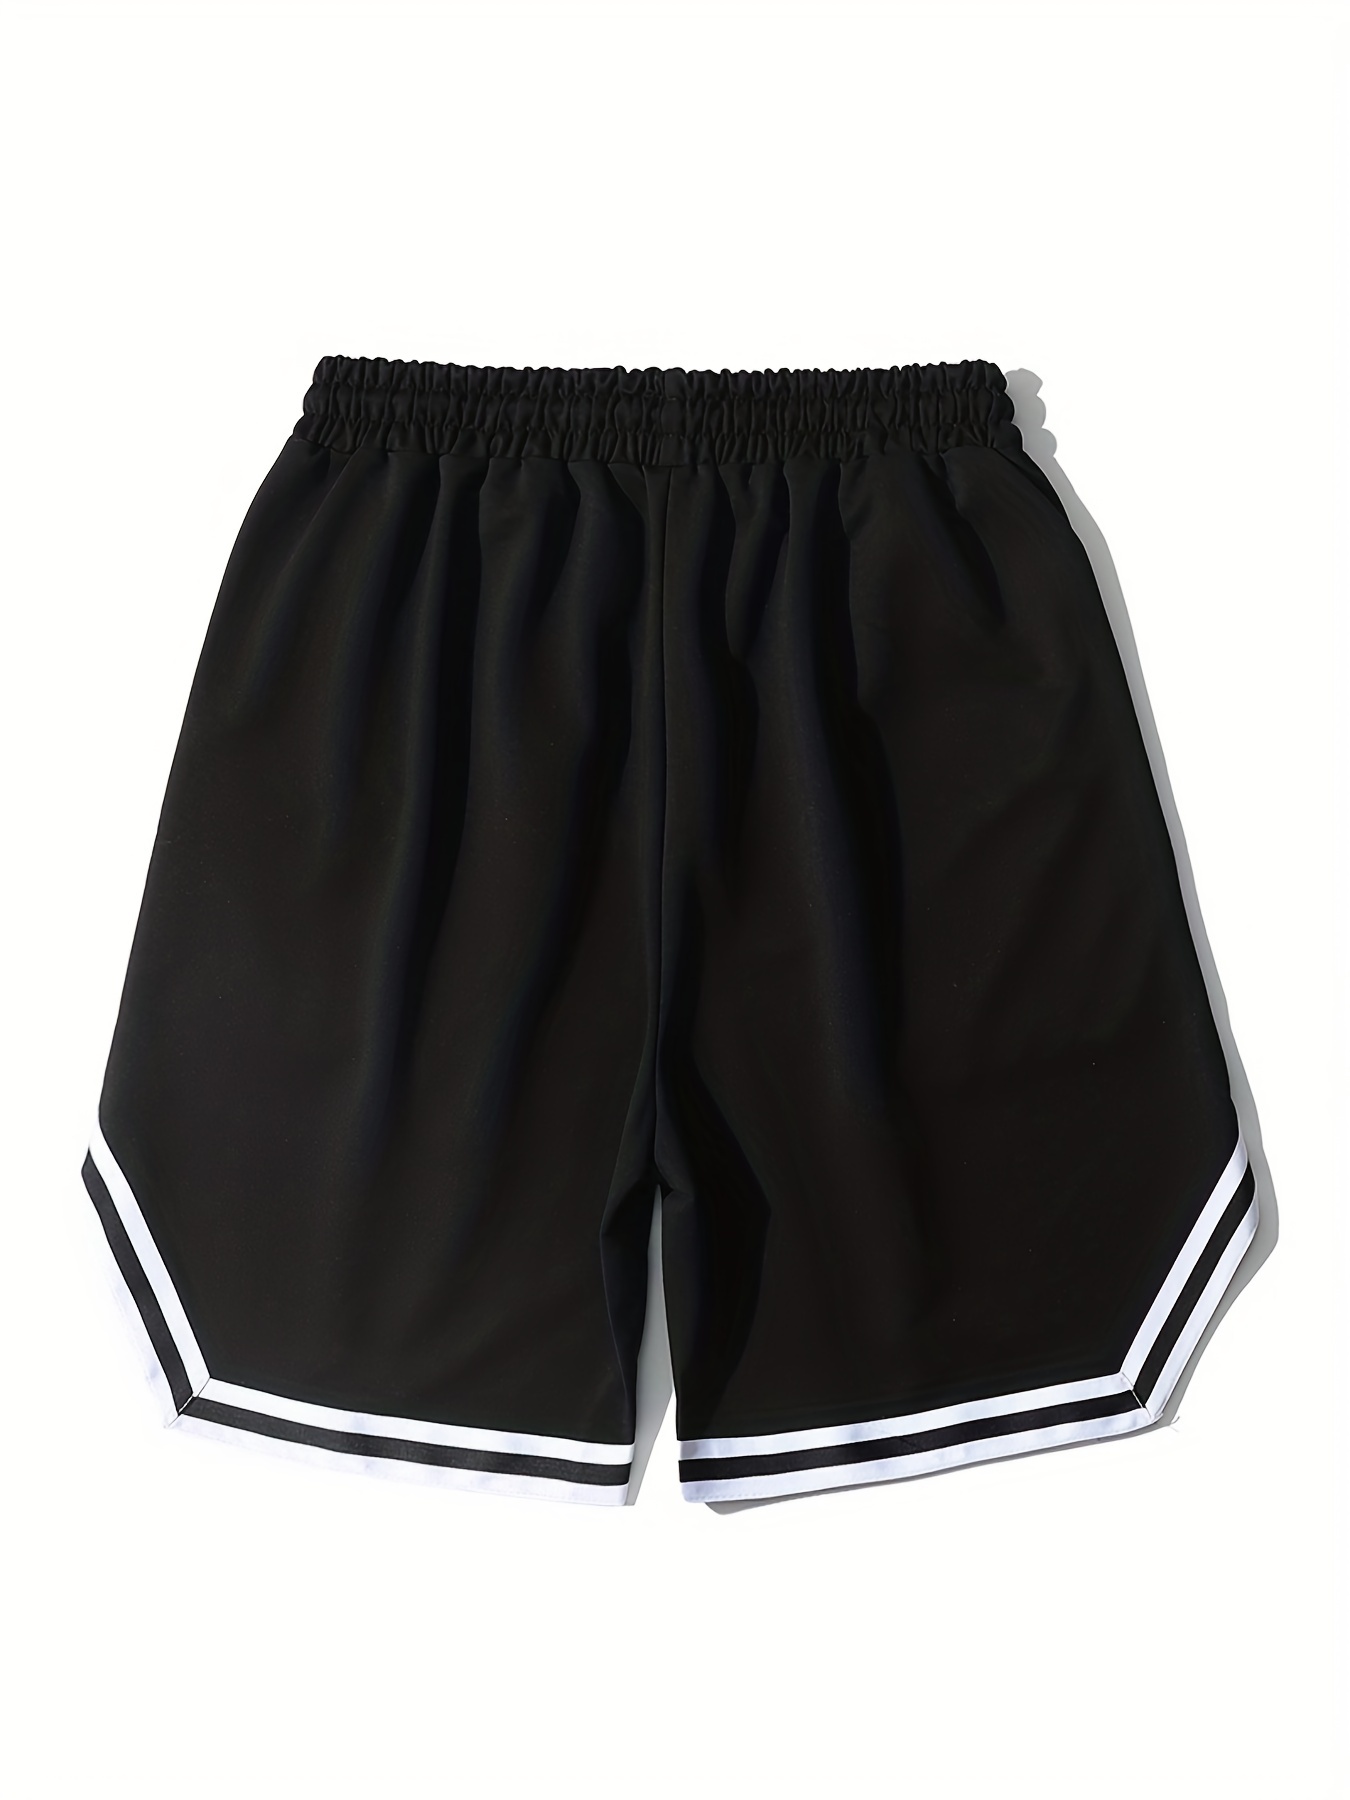 Is That The New Prep Men Letter Graphic Shorts ??